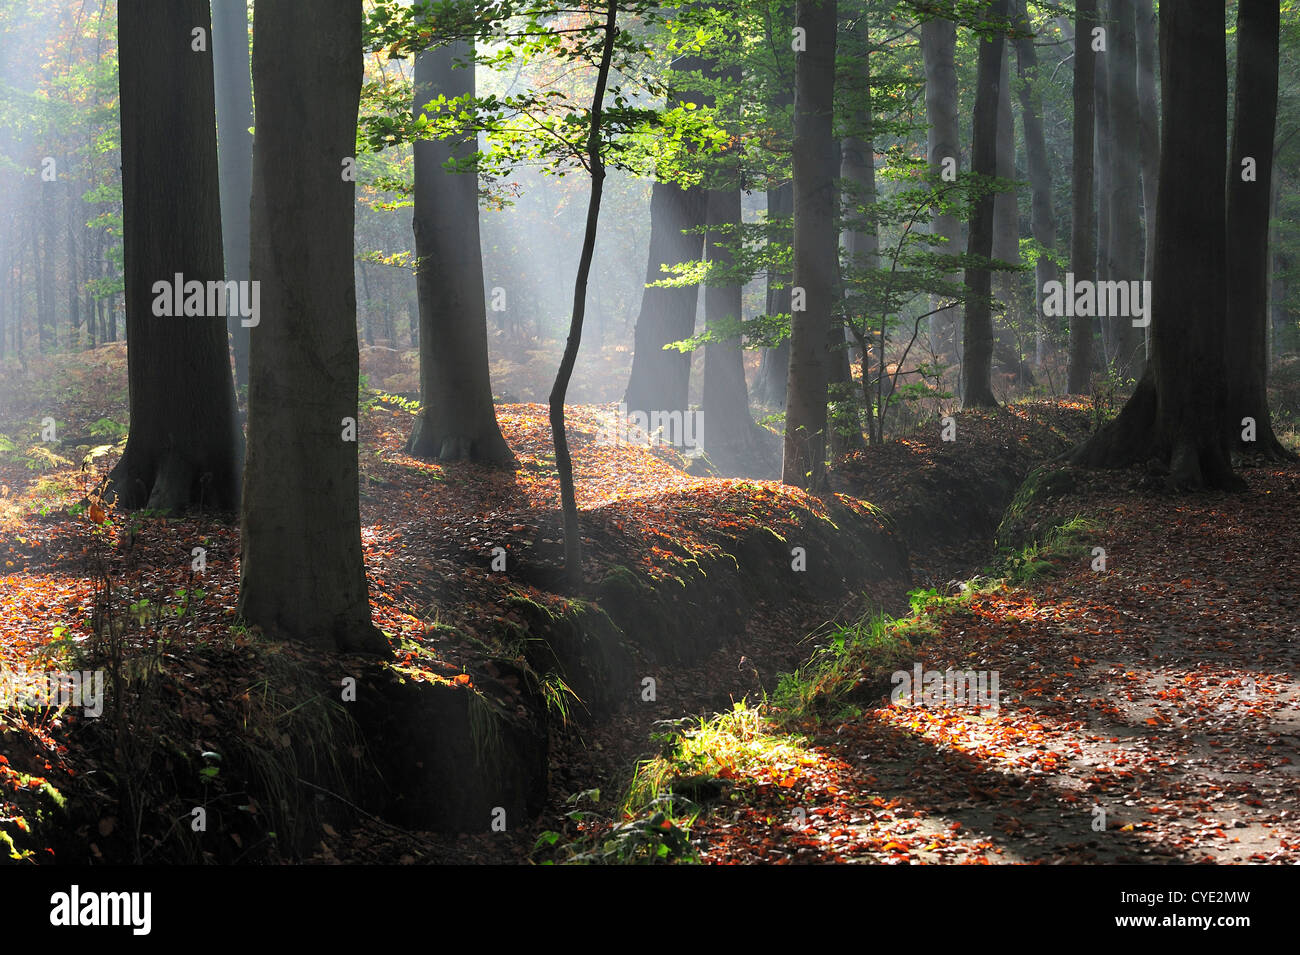 Sunrays shining through broad-leaved forest with beech trees in autumn colours at sunrise creating a tranquil atmosphere Stock Photo